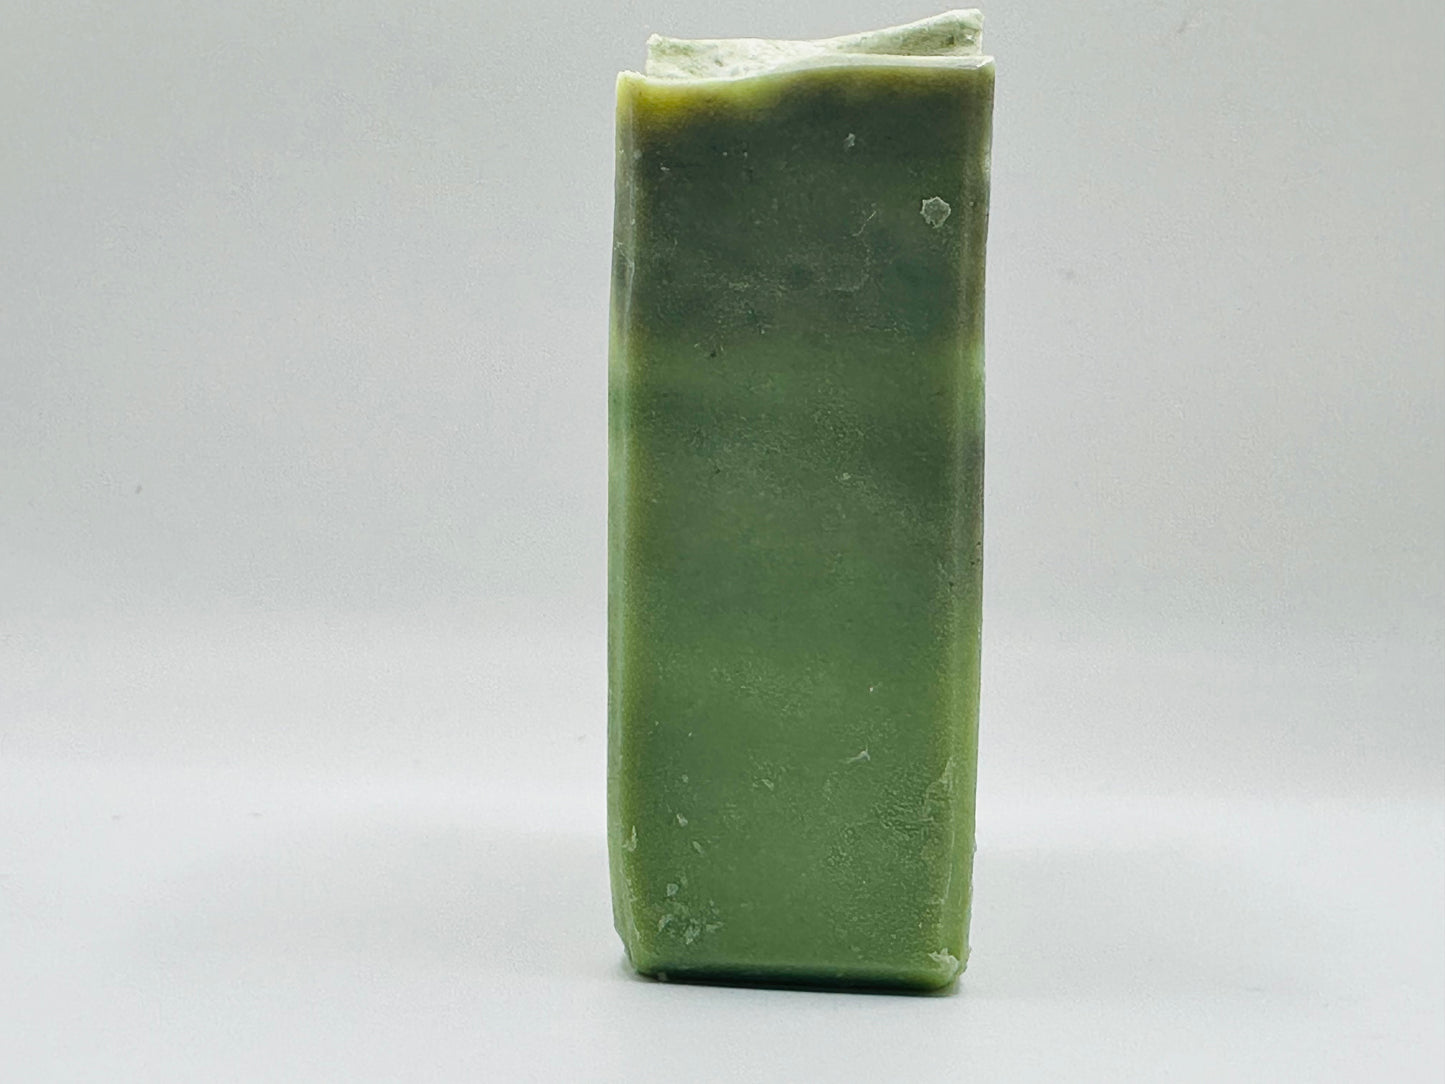 Camouflage Soap